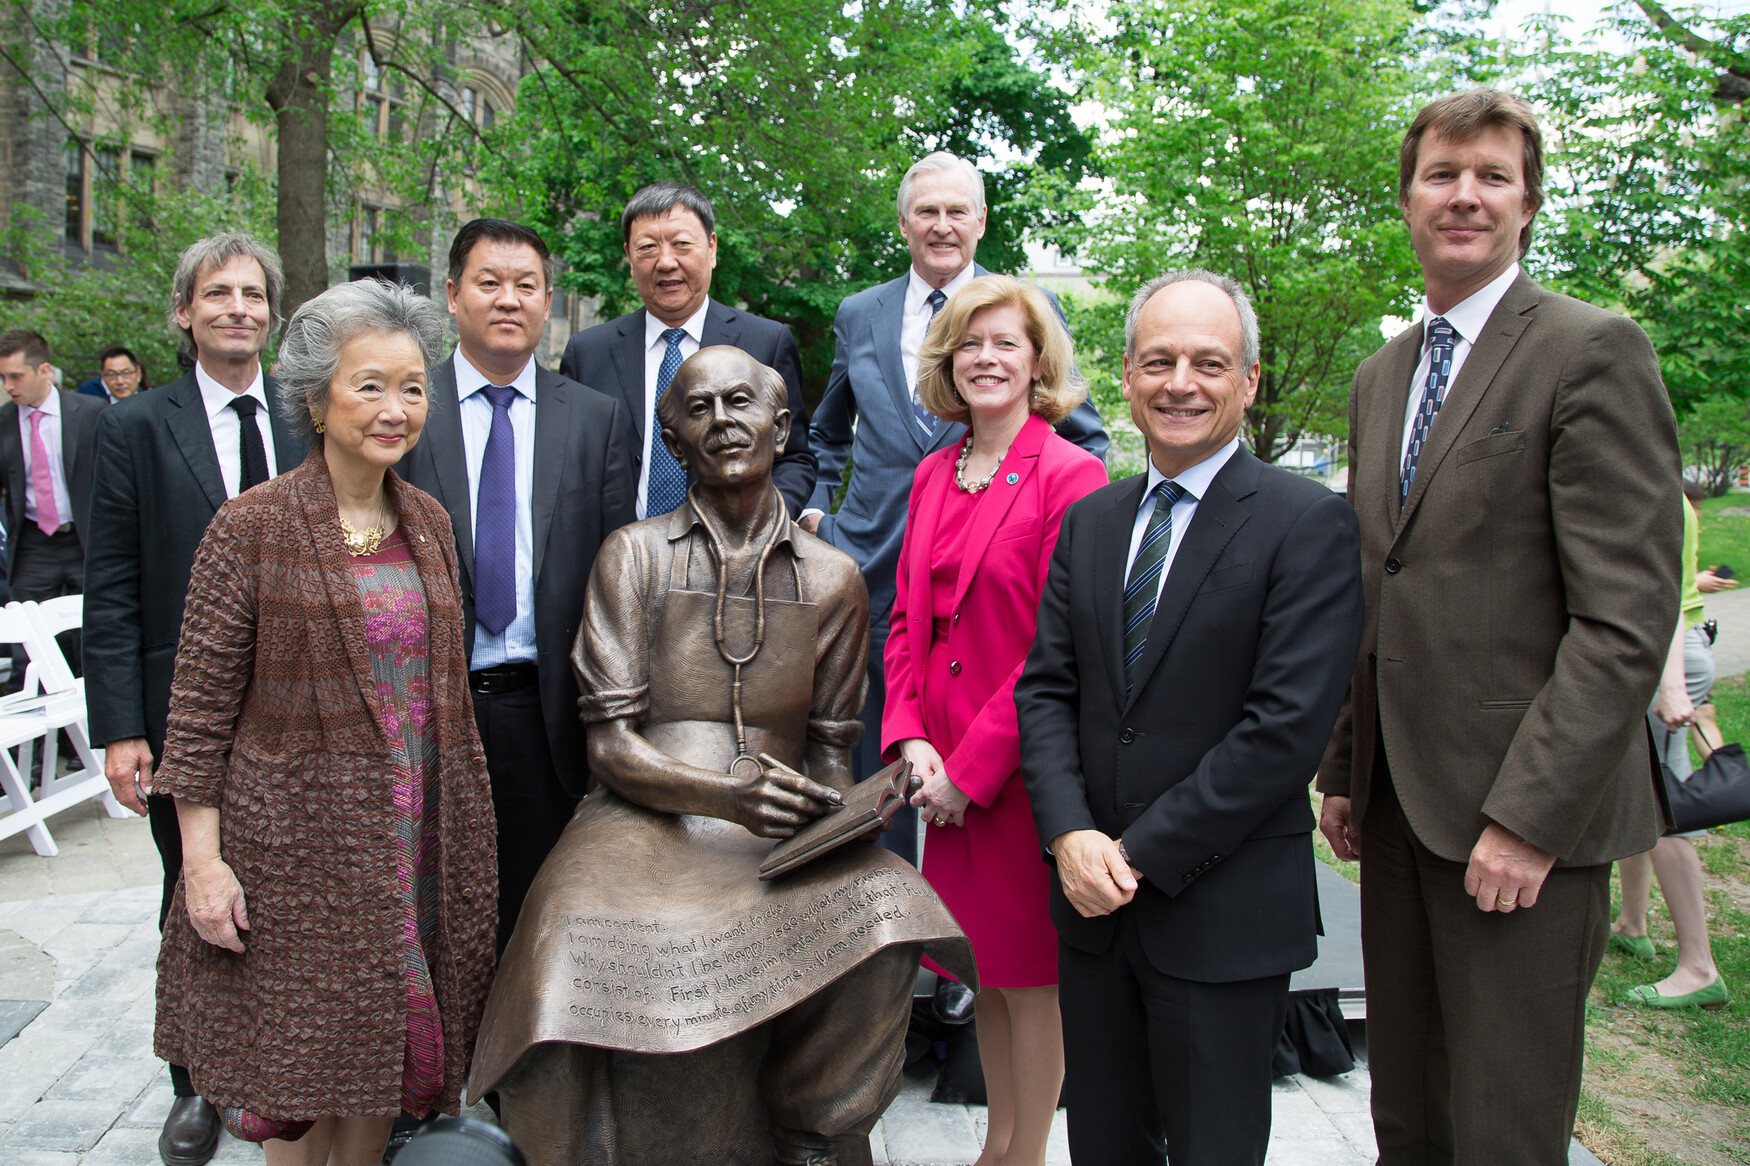 The new sculpture of Norman Bethune was unveiled May 30. Picture are (left to right): David Pellettier, Adrienne Clarkson, Zhang Bin, Niu Gensheng, Michael Wilson, Catharine Whiteside, Meric Gertler and Dr. David Price, a member of the Bethune family.